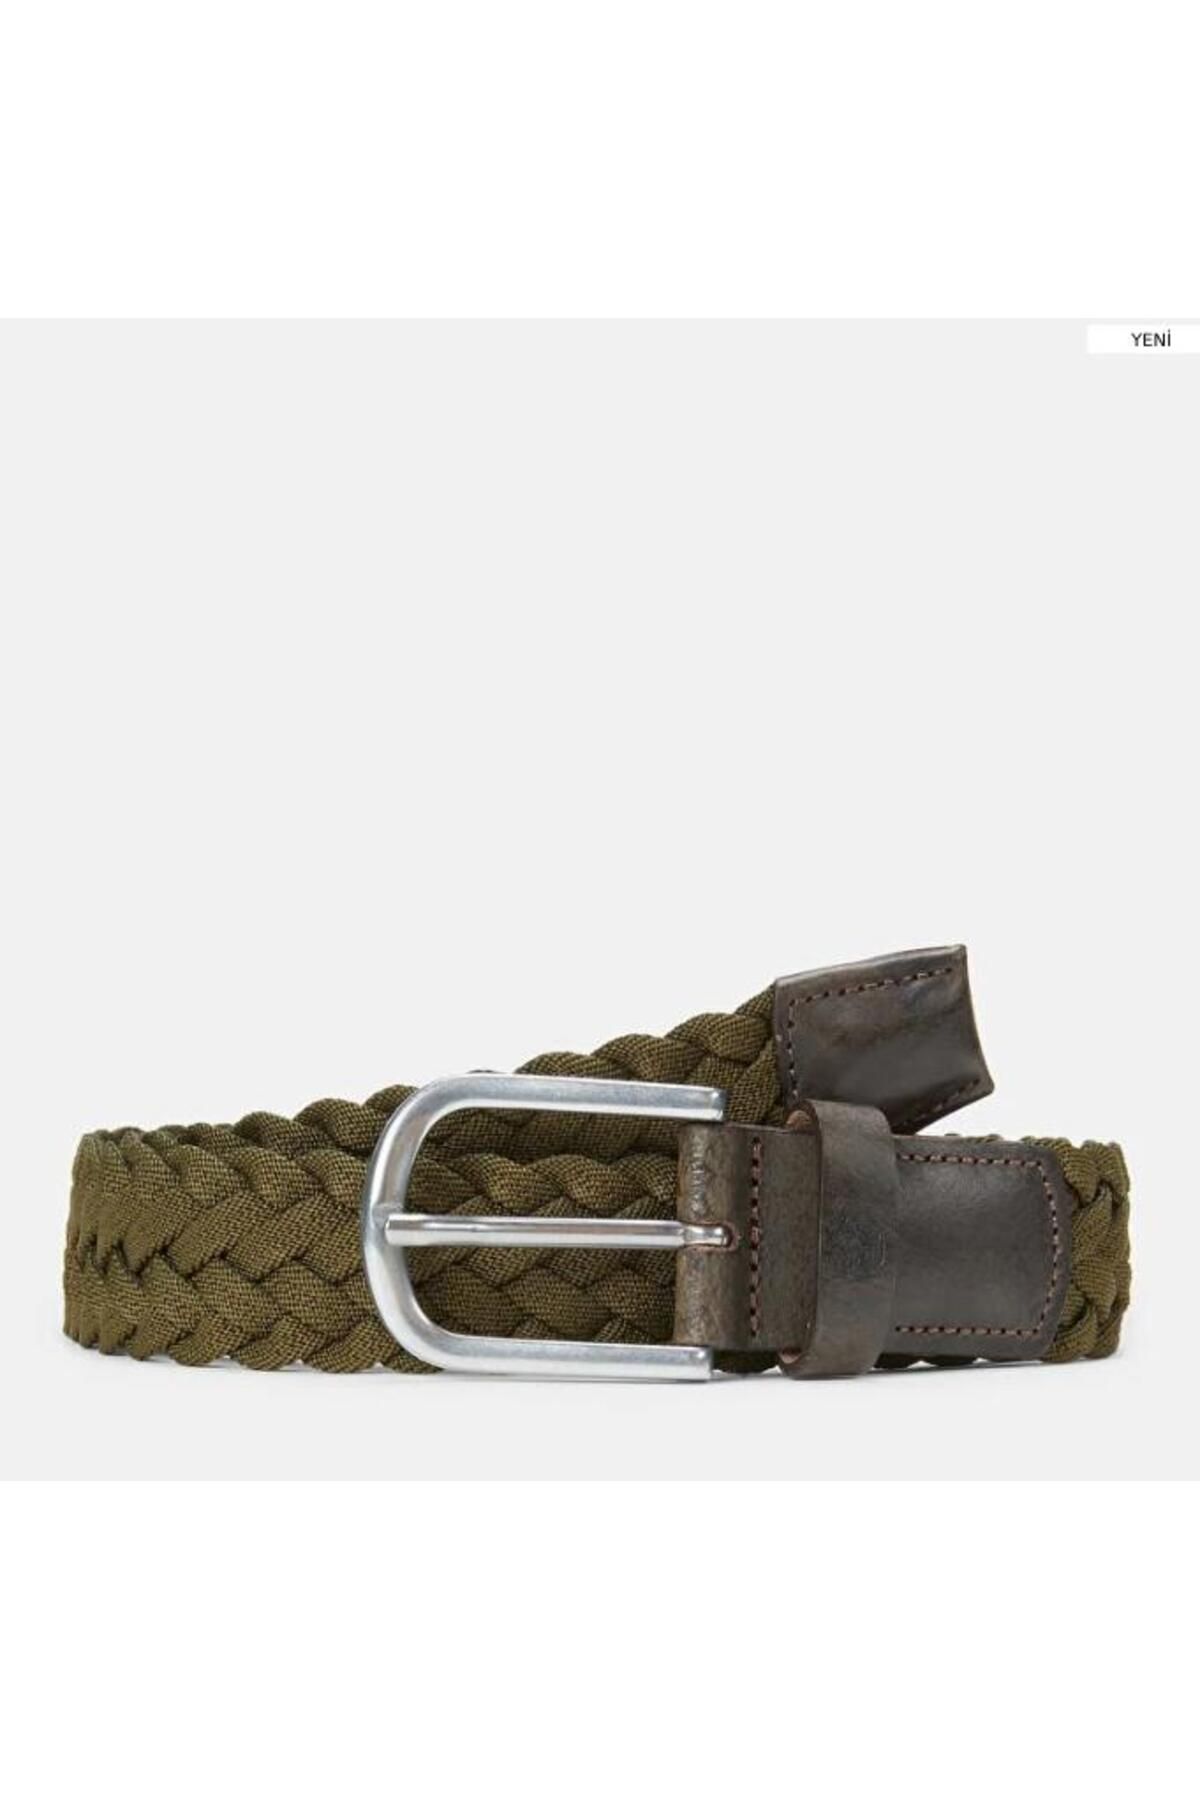 Timberland 35mm braided belt with leather details